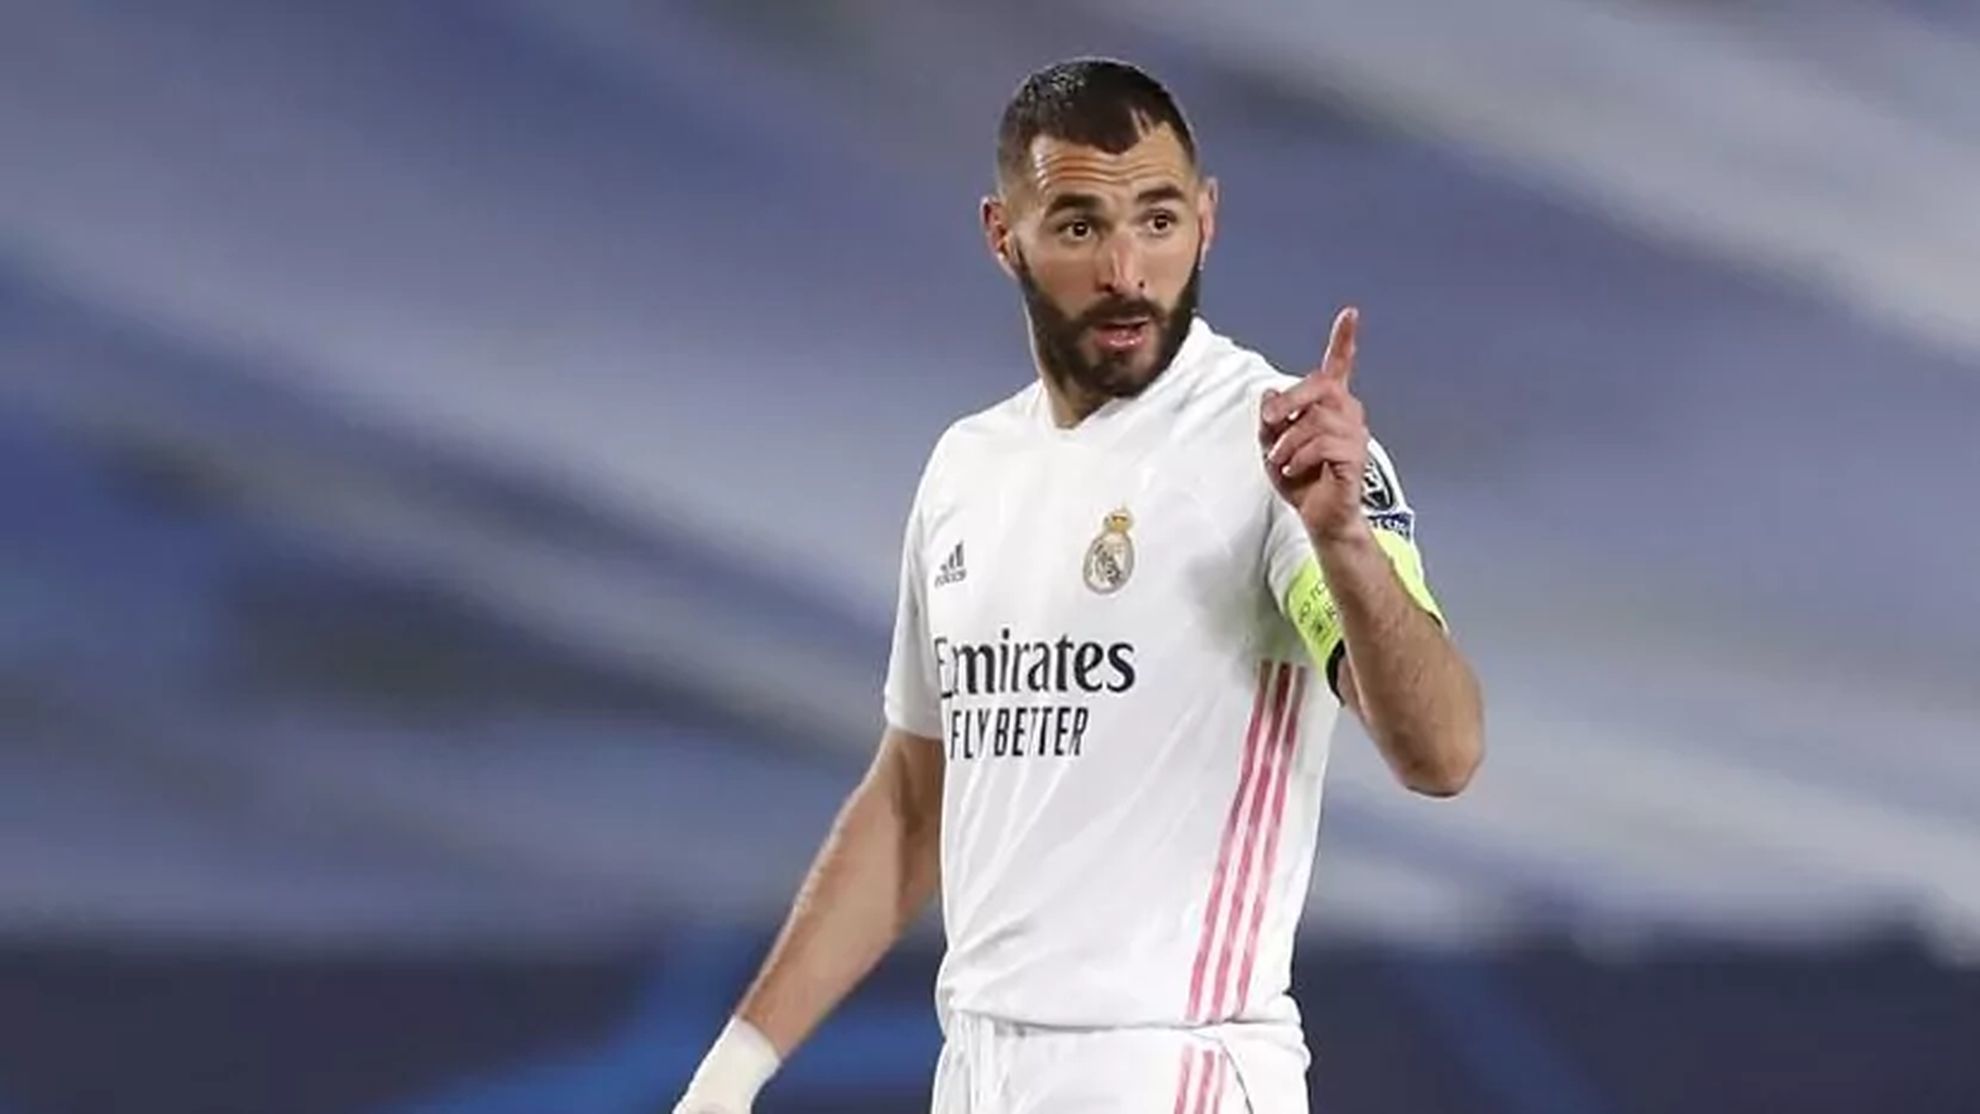 Karim Benzema is in the Real Madrid starting XI